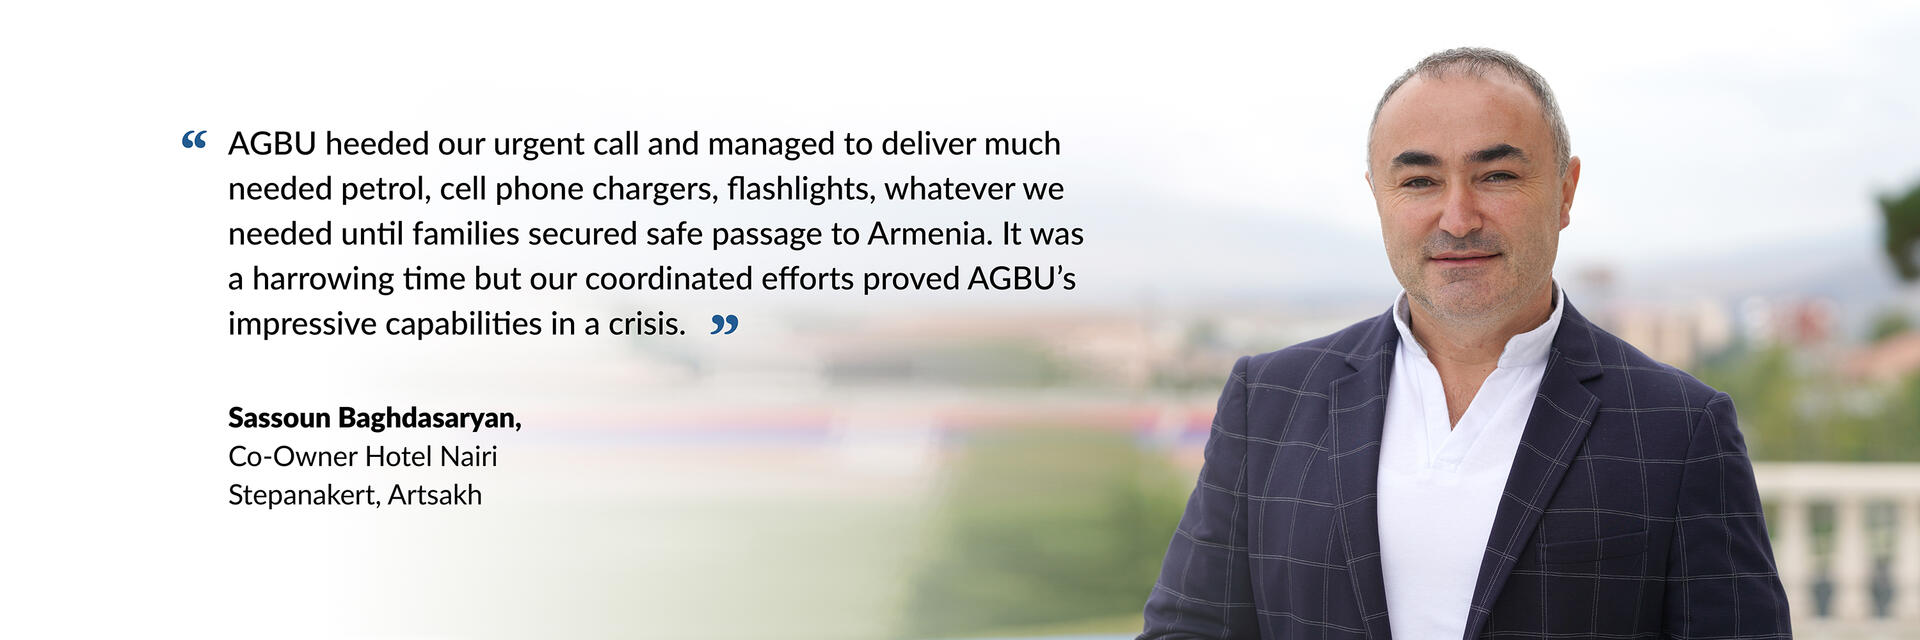 Artsakh Relief quote carousel image 1